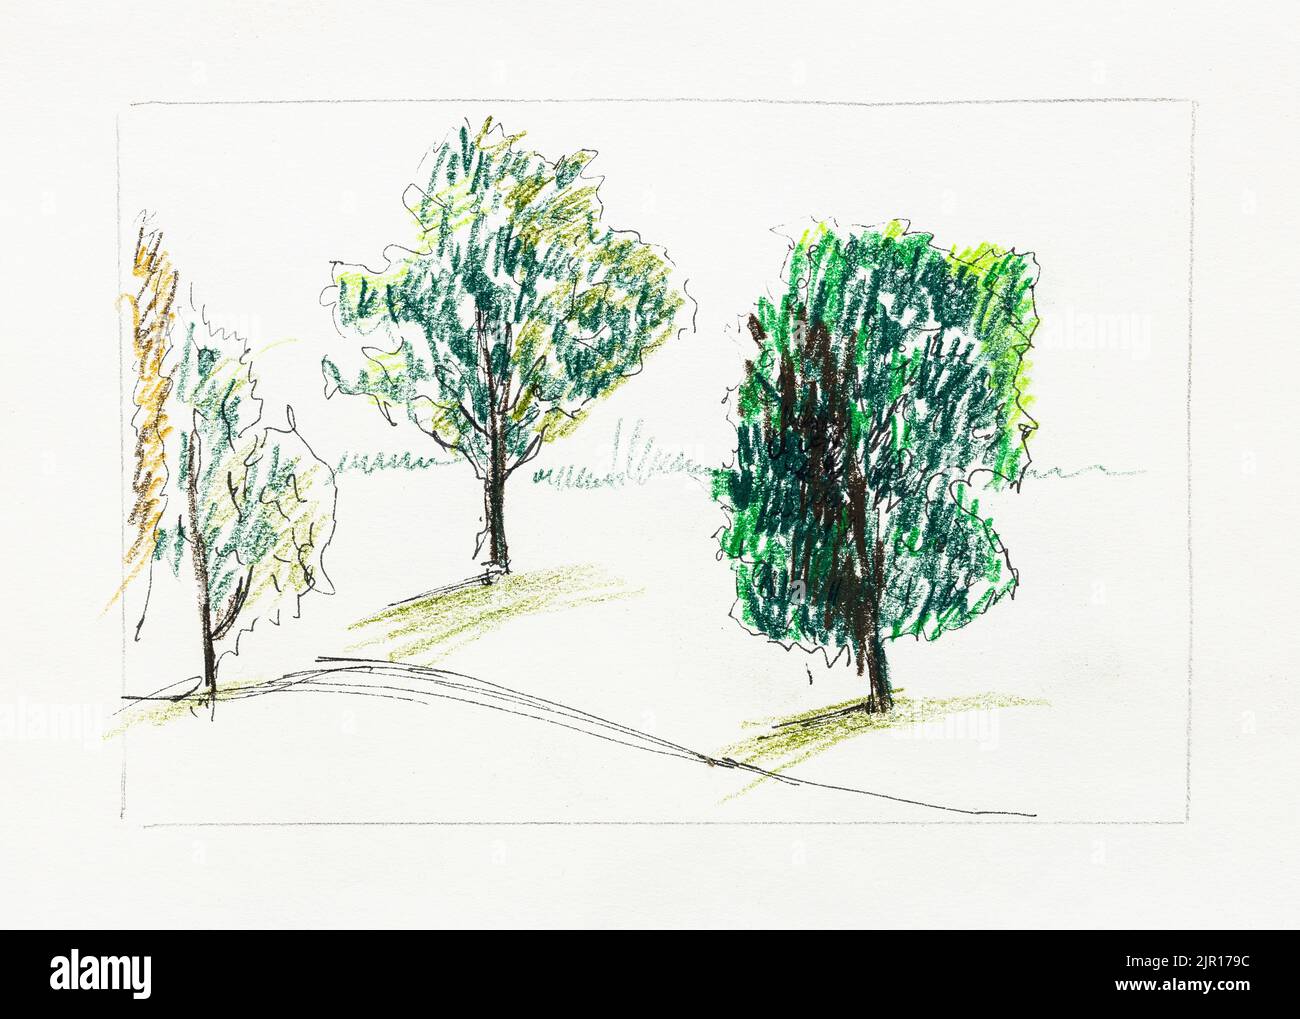 hand-drawn green trees by black pen and color pencils on old textured paper Stock Photo